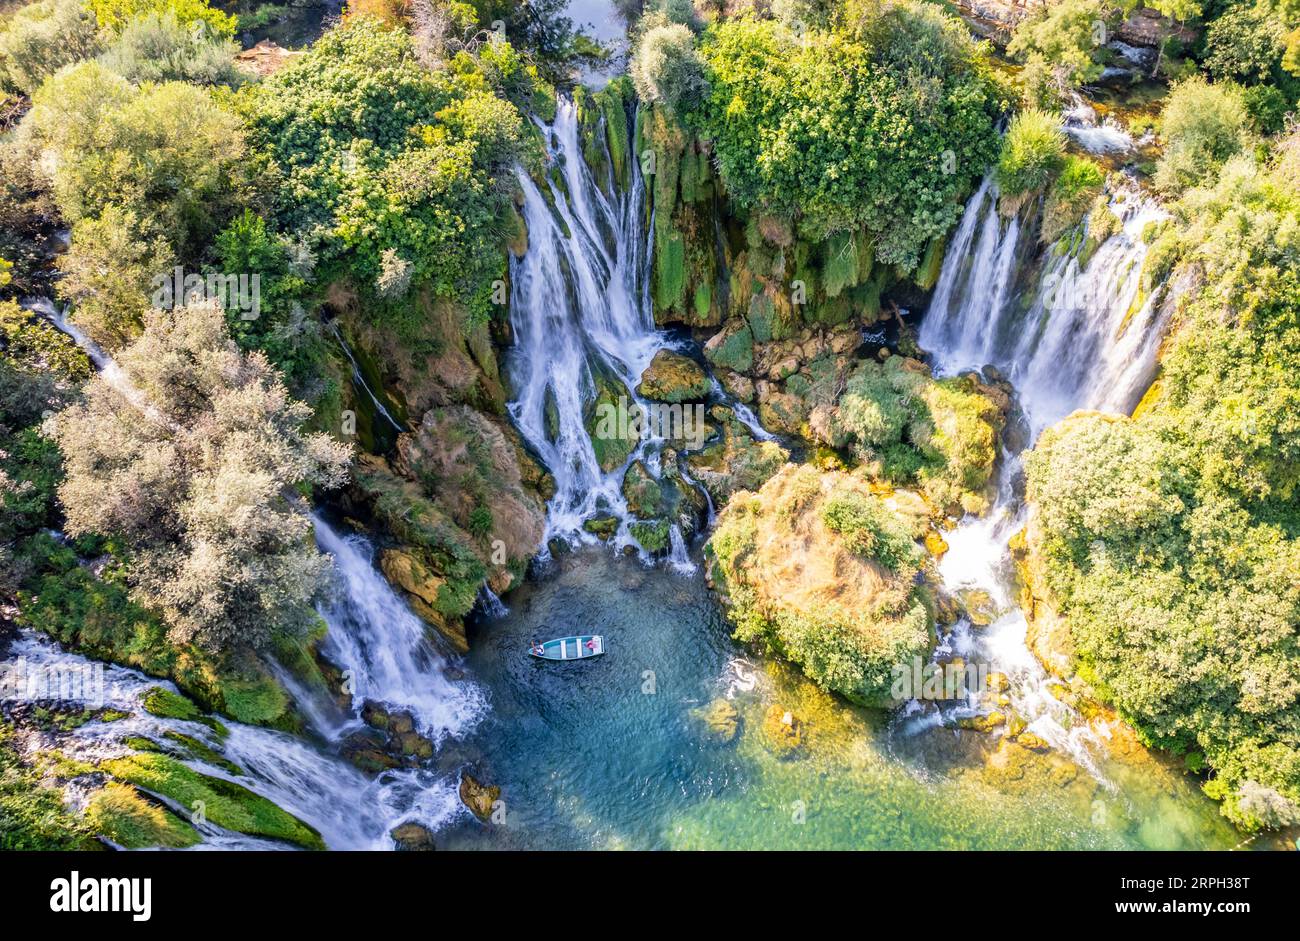 Kravica karst forest waterfall cascades flows with boat on the lake surface, Trebizat river, Bosnia and Herzegovina Stock Photo